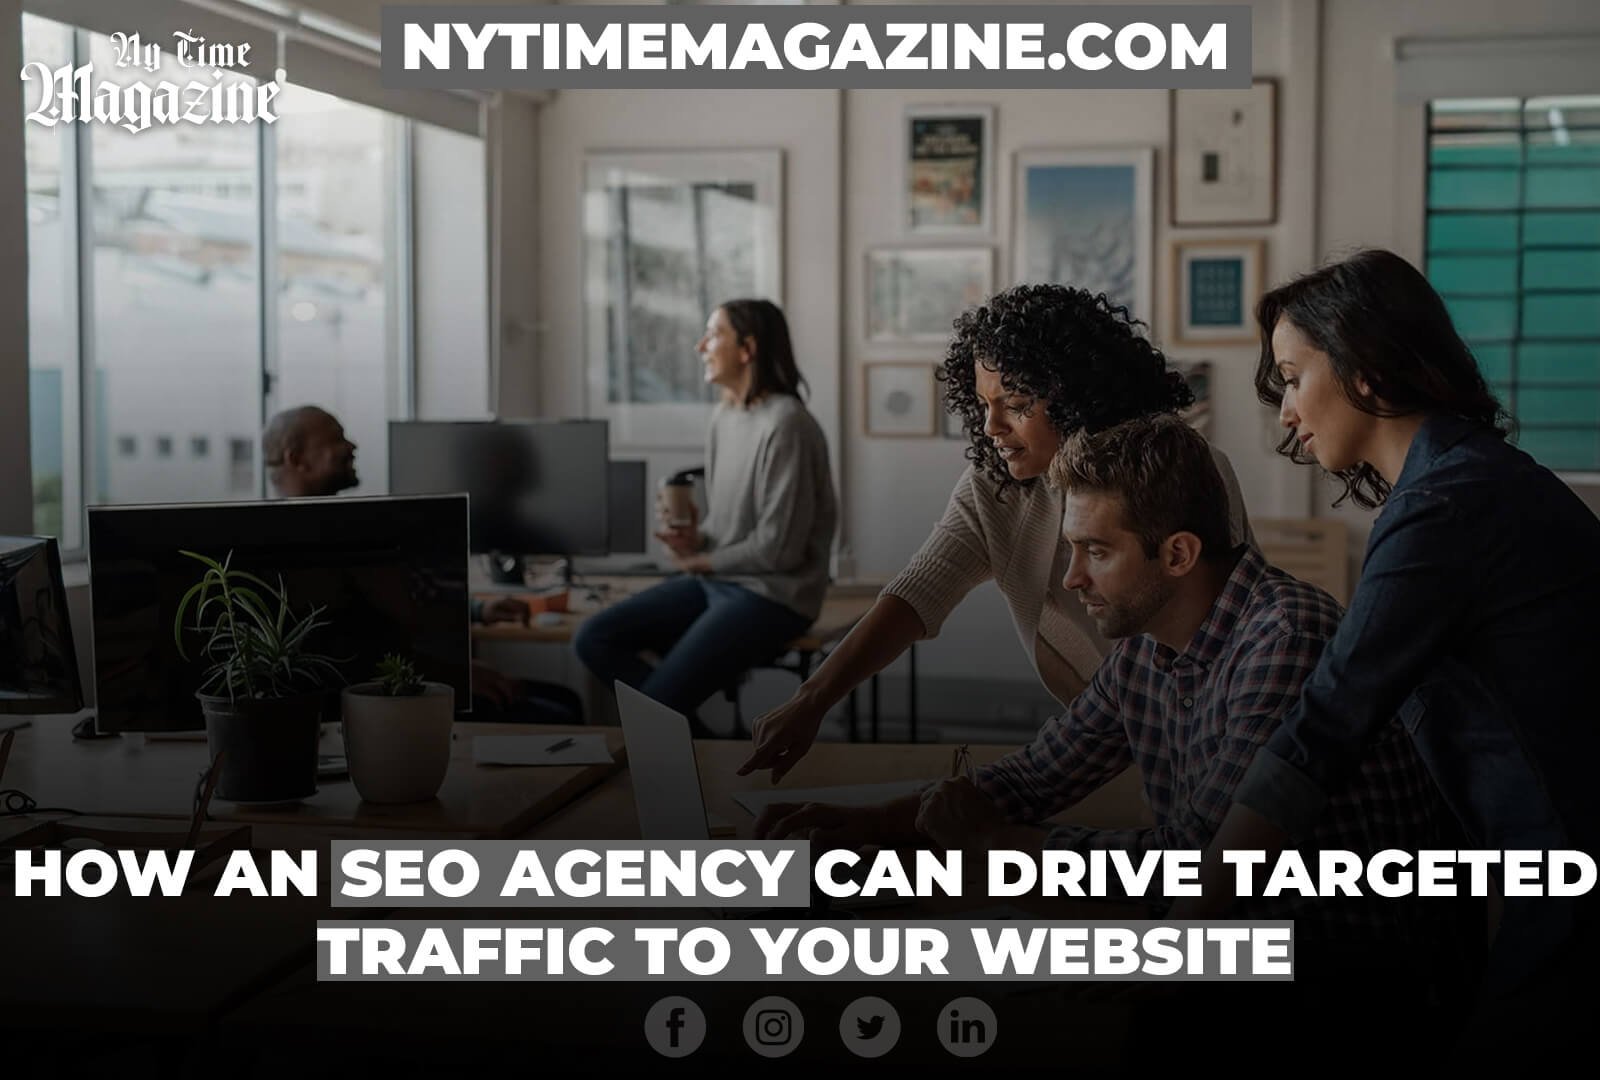 How an SEO Agency Can Drive Targeted Traffic to Your Website